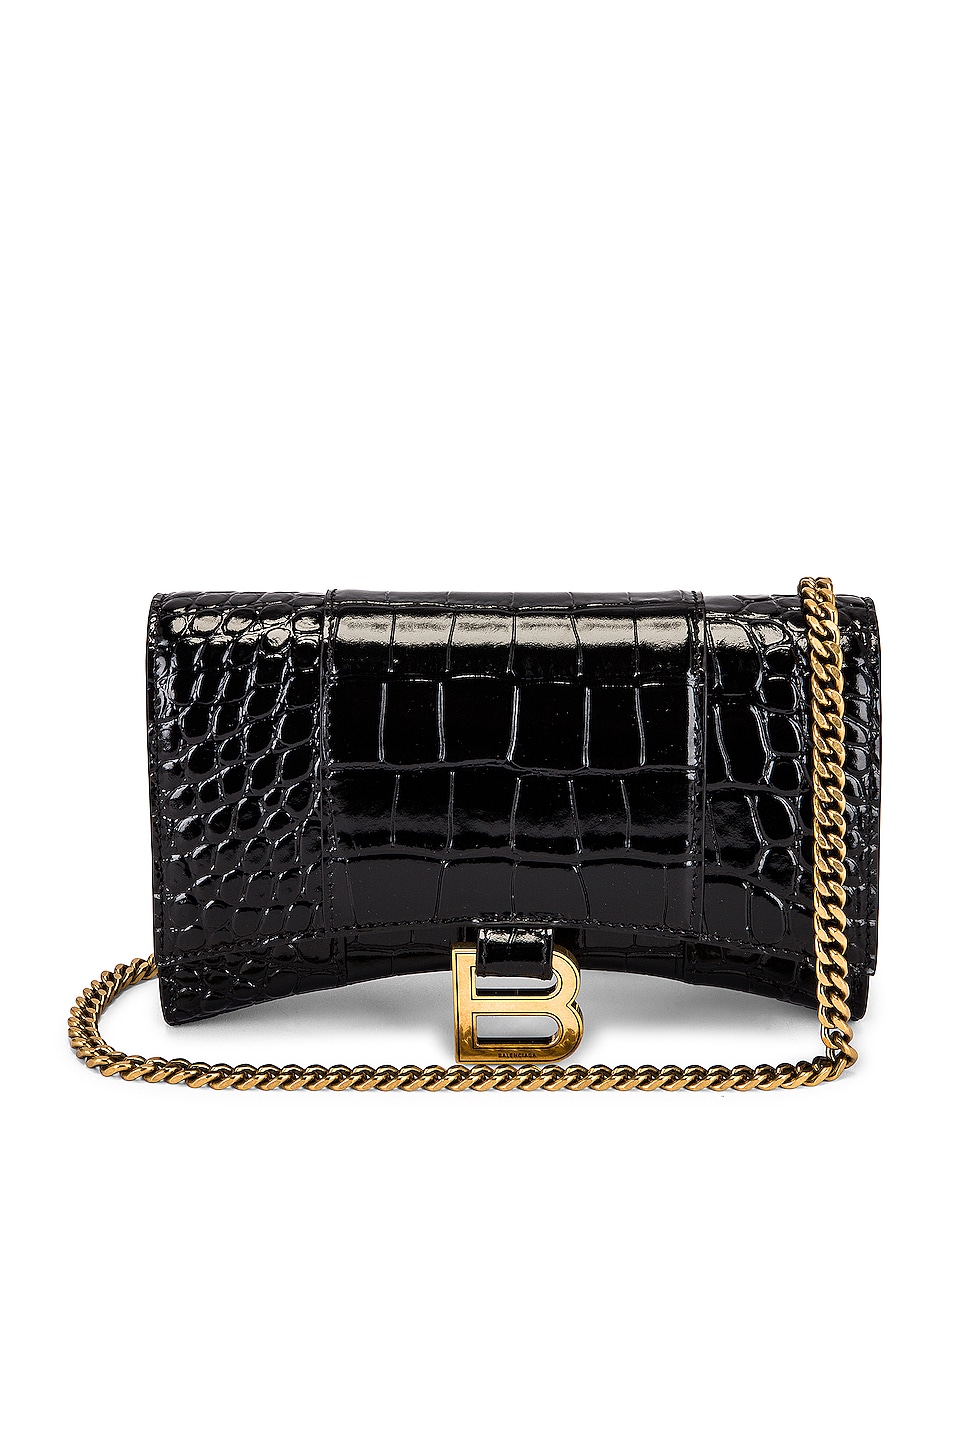 Hourglass Wallet On Chain Bag in Black